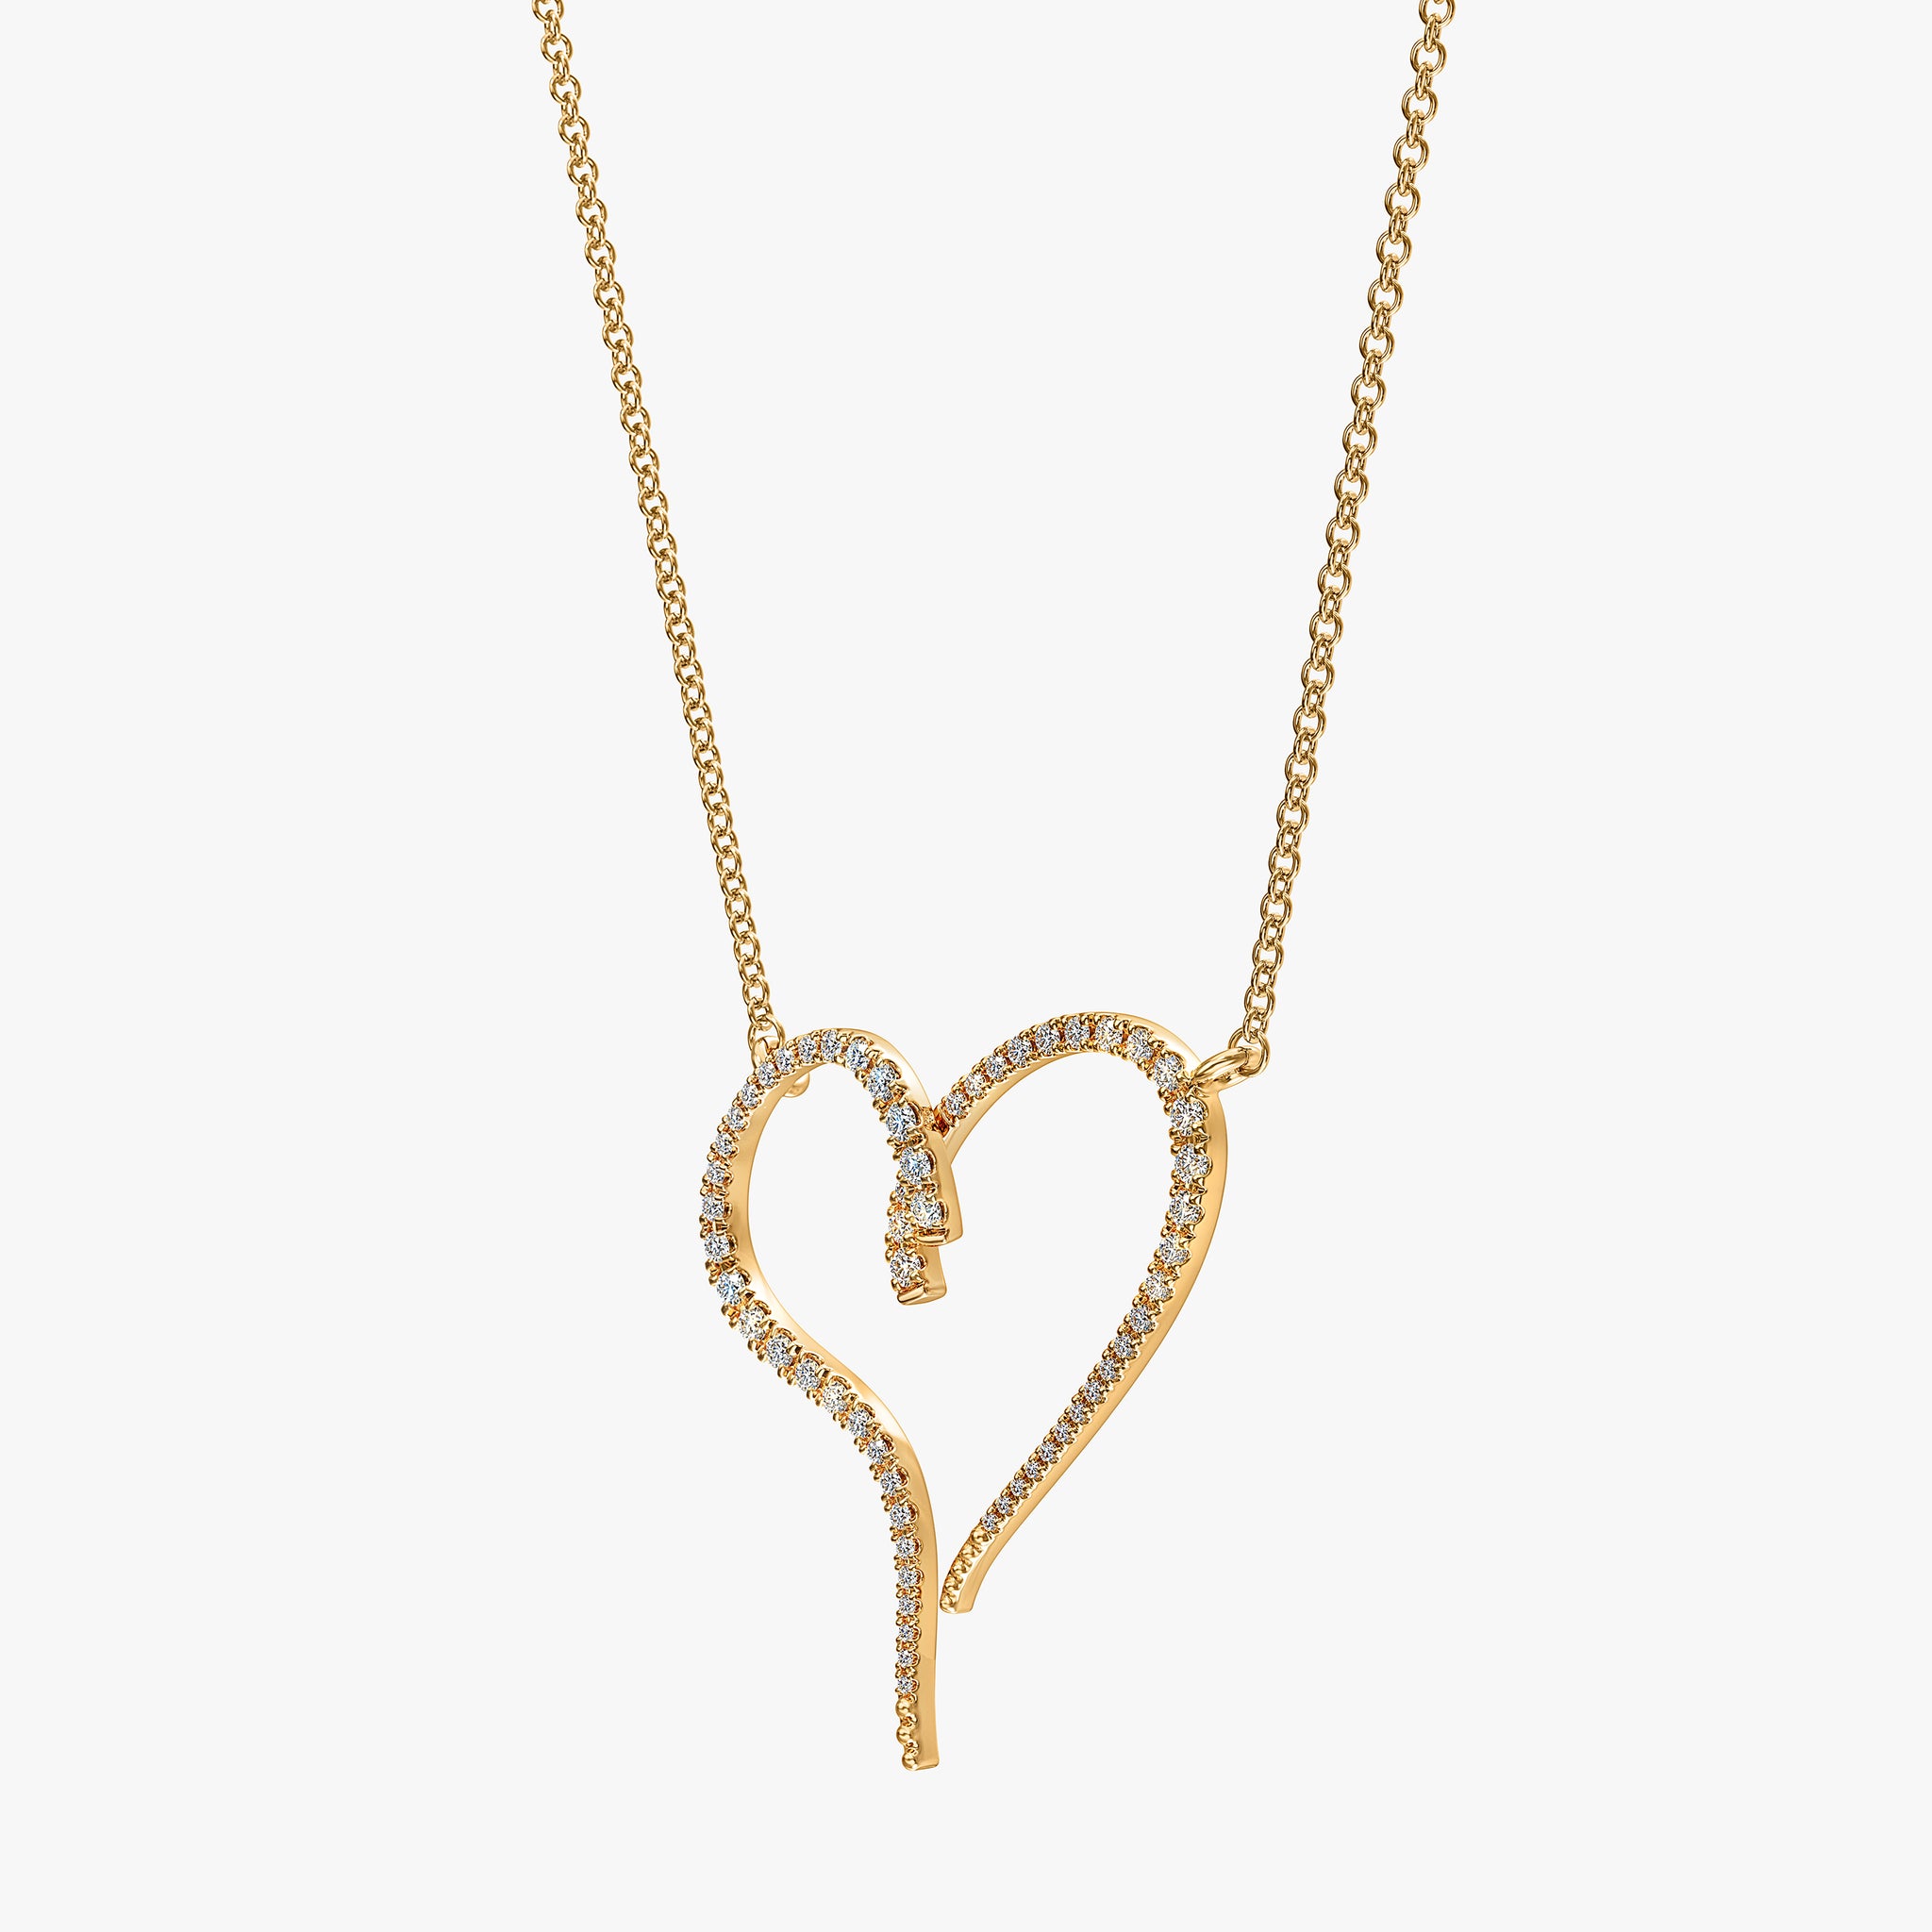 J'EVAR 14KT Yellow Gold Heart ALTR Lab Grown Diamond Necklace Perspective View